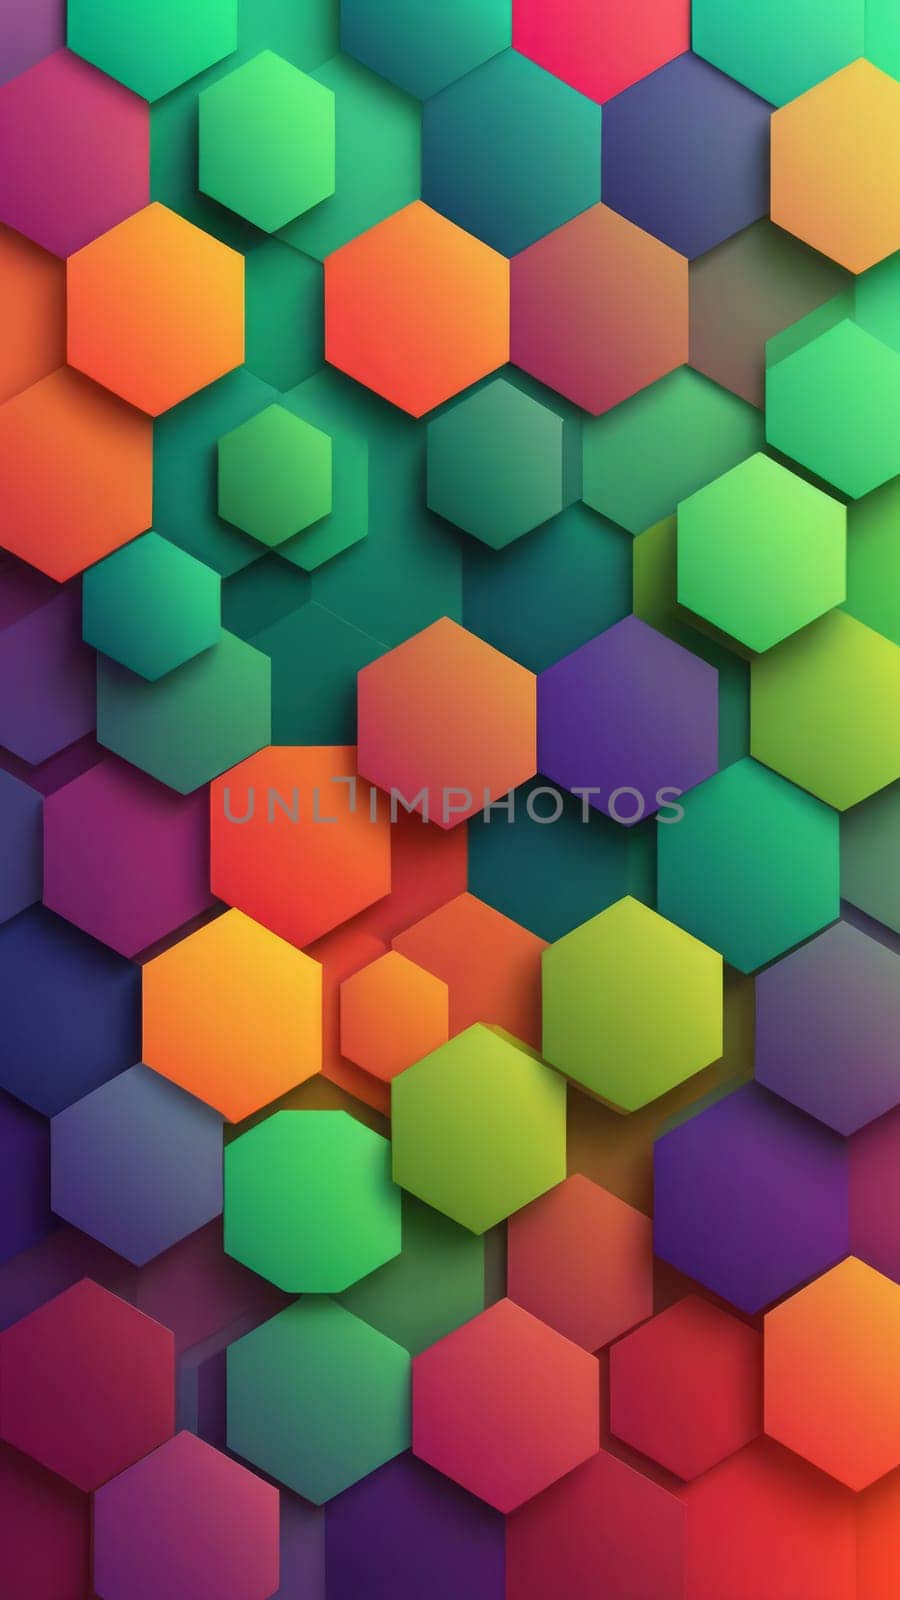 Creativity in paints from Hexagonal shapes and green by nkotlyar